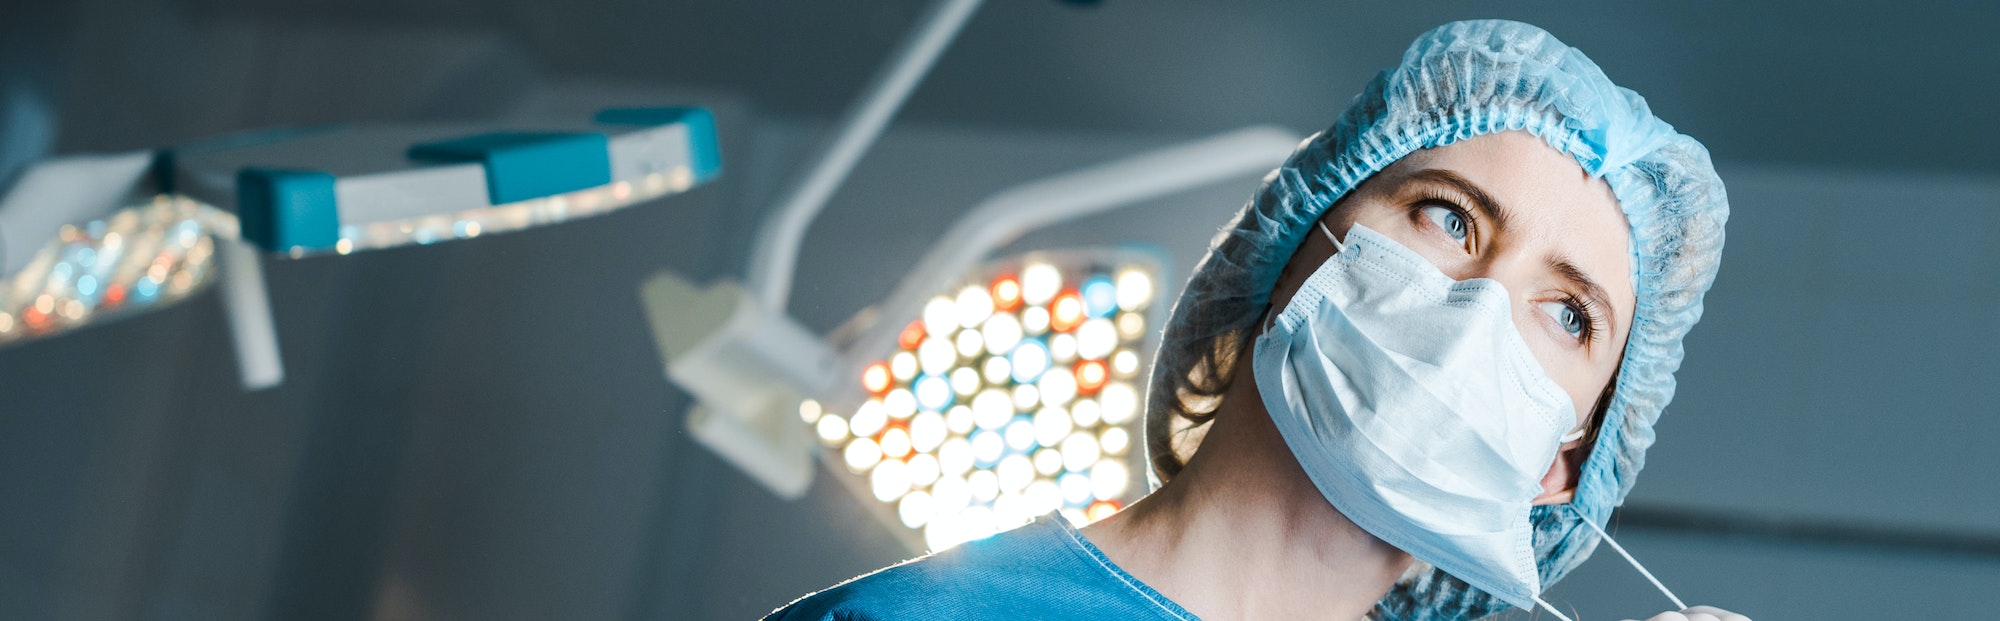 panoramic shot of nurse putting off medical mask in operating room